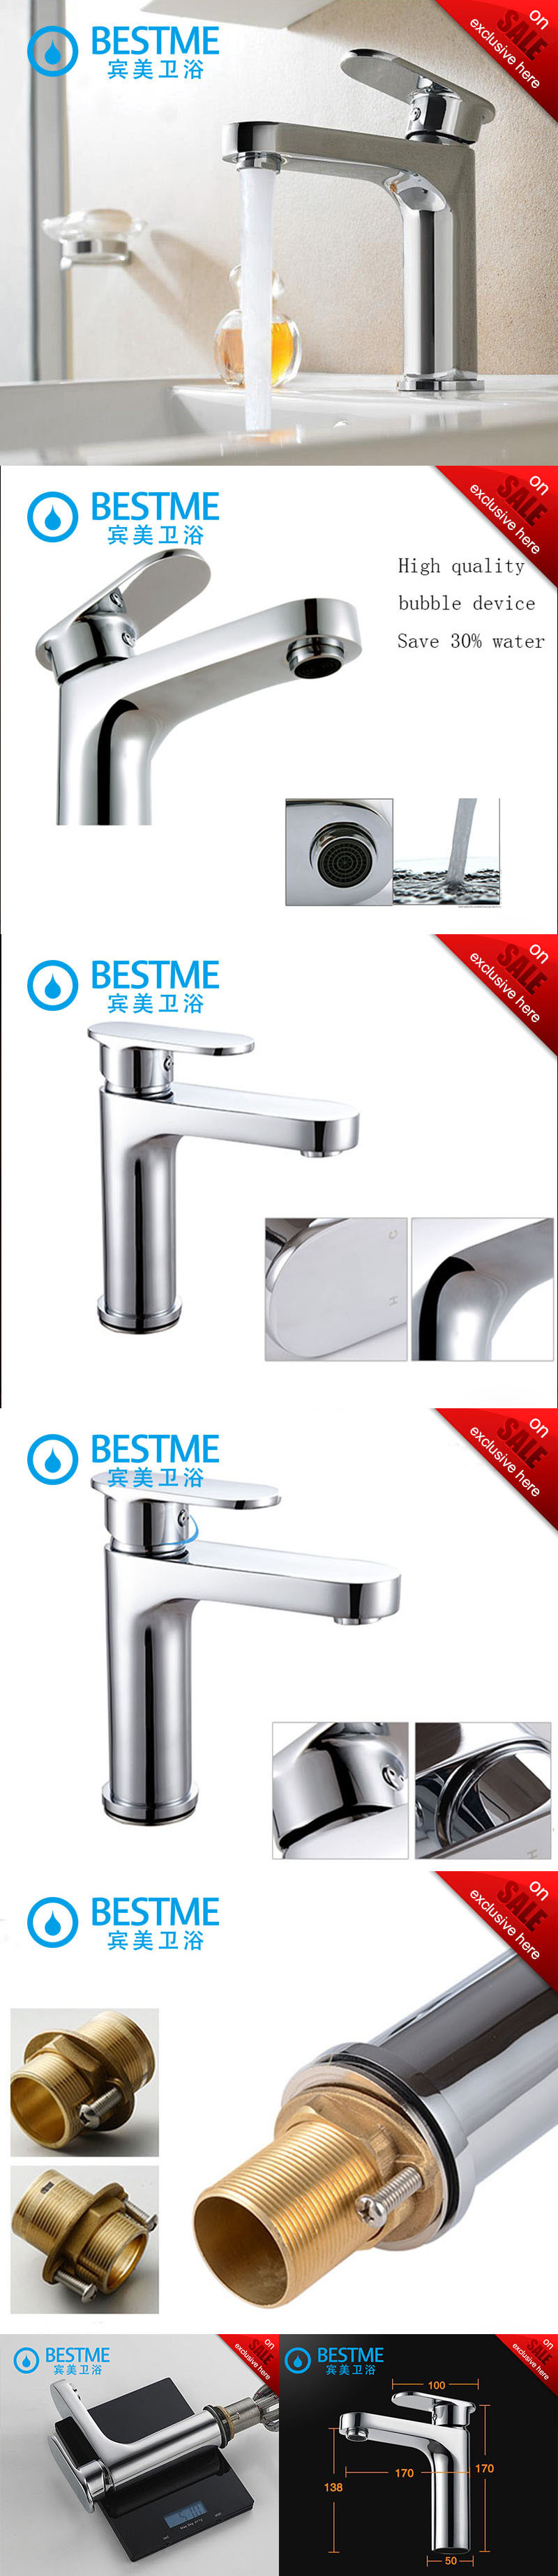 China Wholesale Chrome Finished Water Tap Wash Basin Faucet (BM-B10203)